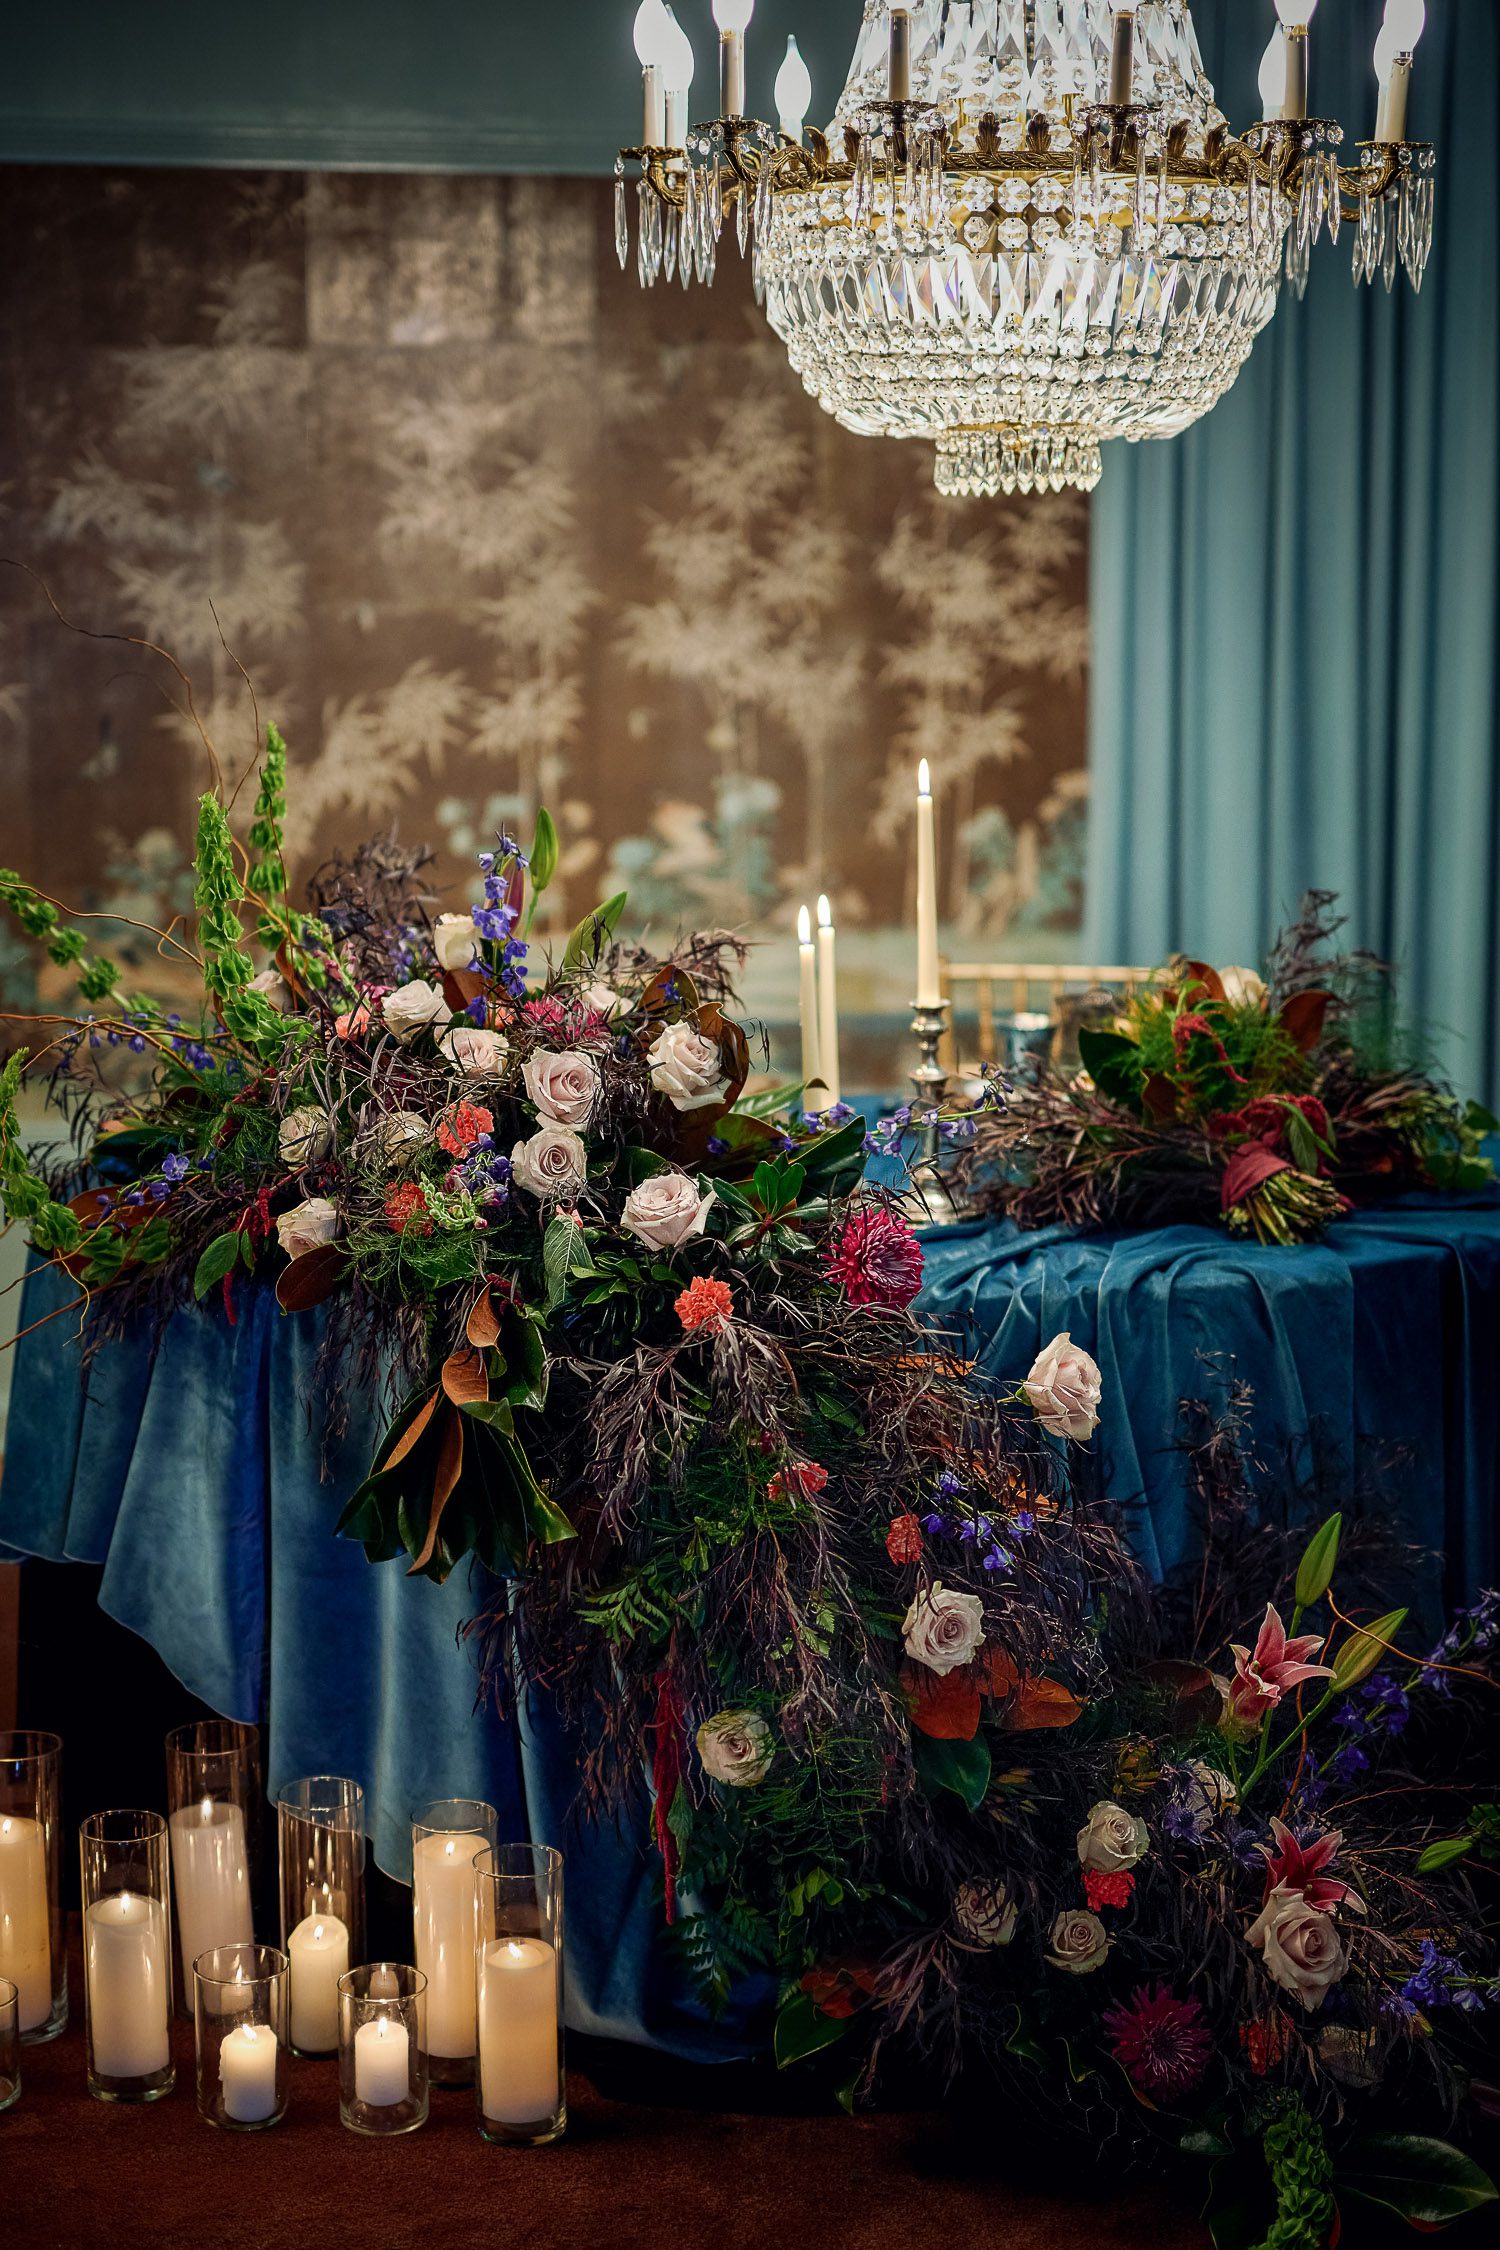 Blue Velvet Table Cloth with flowers cascading over edge with hand painted wall paper at Chatol in Centralia, Missouri.